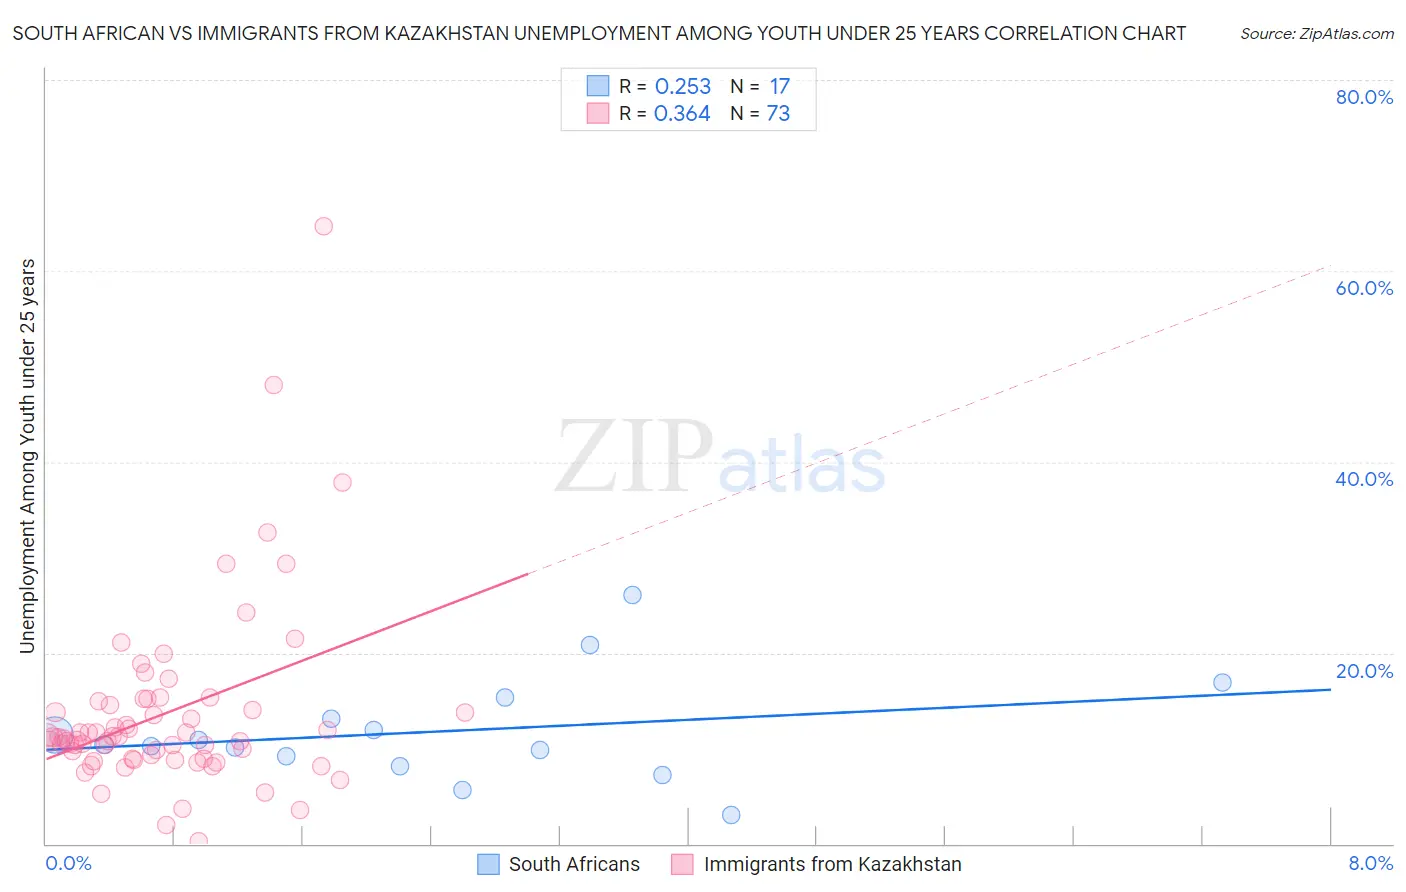 South African vs Immigrants from Kazakhstan Unemployment Among Youth under 25 years